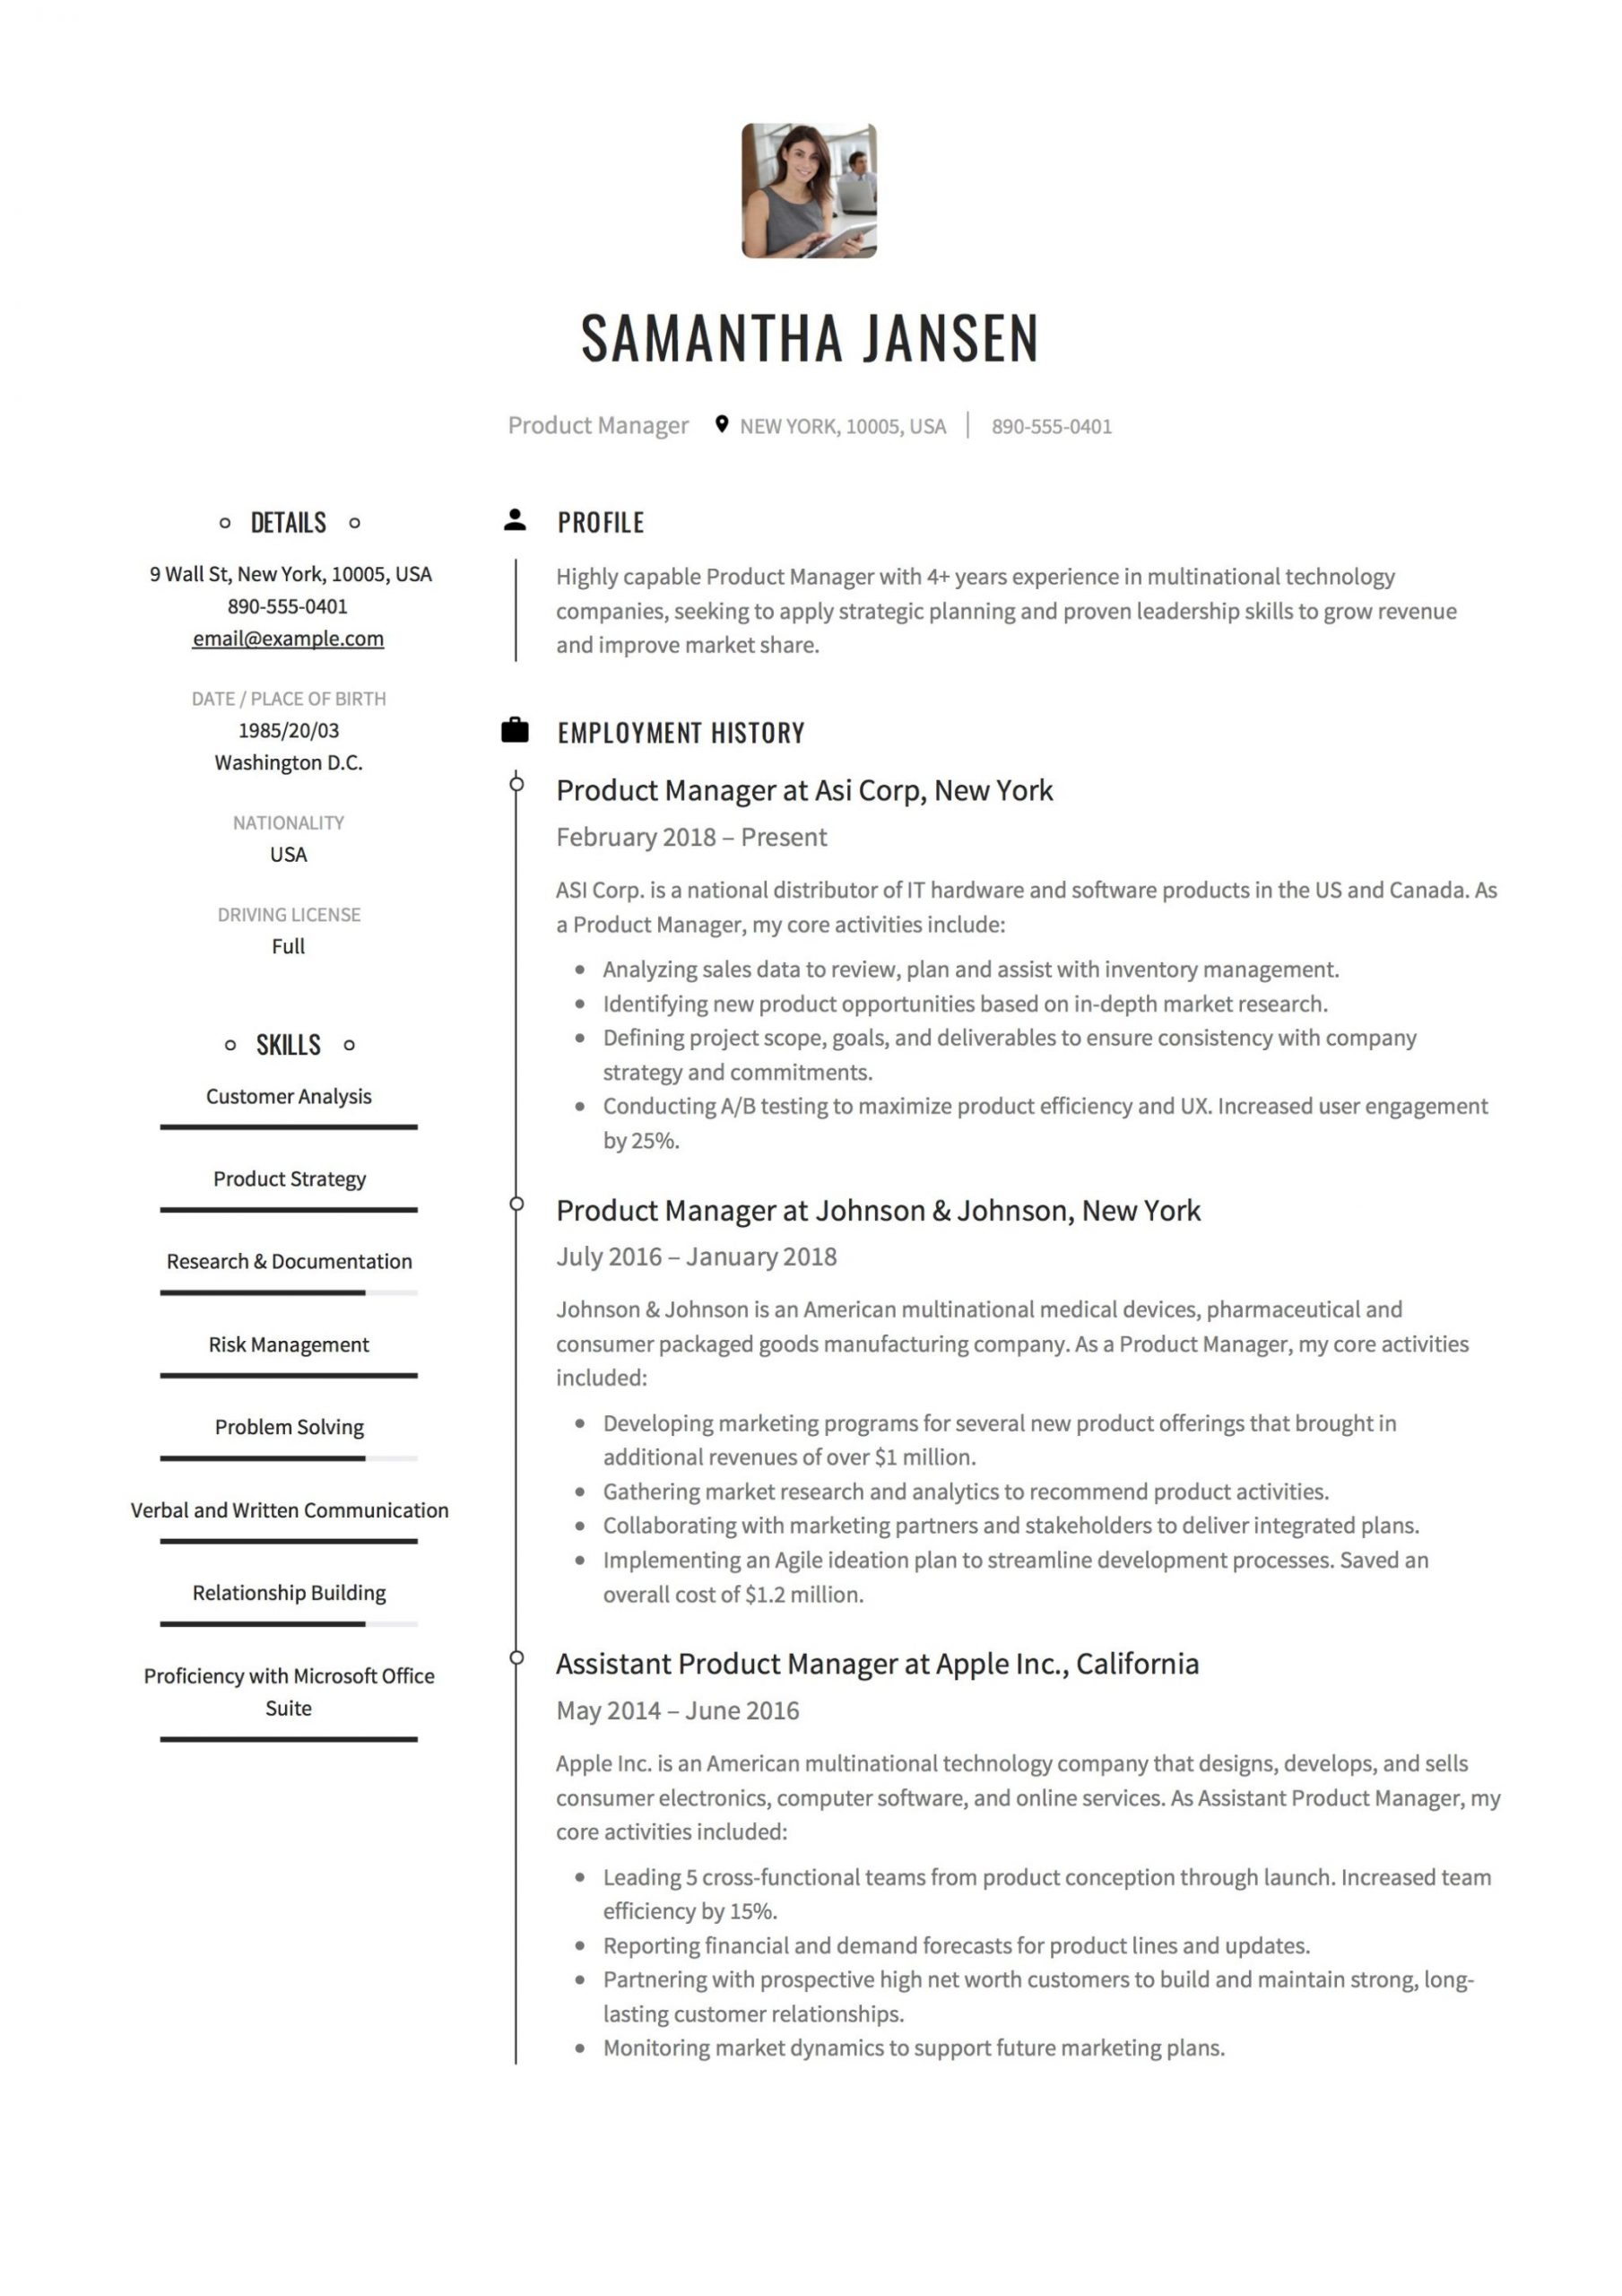 Director Of Product Development Resume Sample Product Manager Resume & Guide   12 Samples Pdf 2020